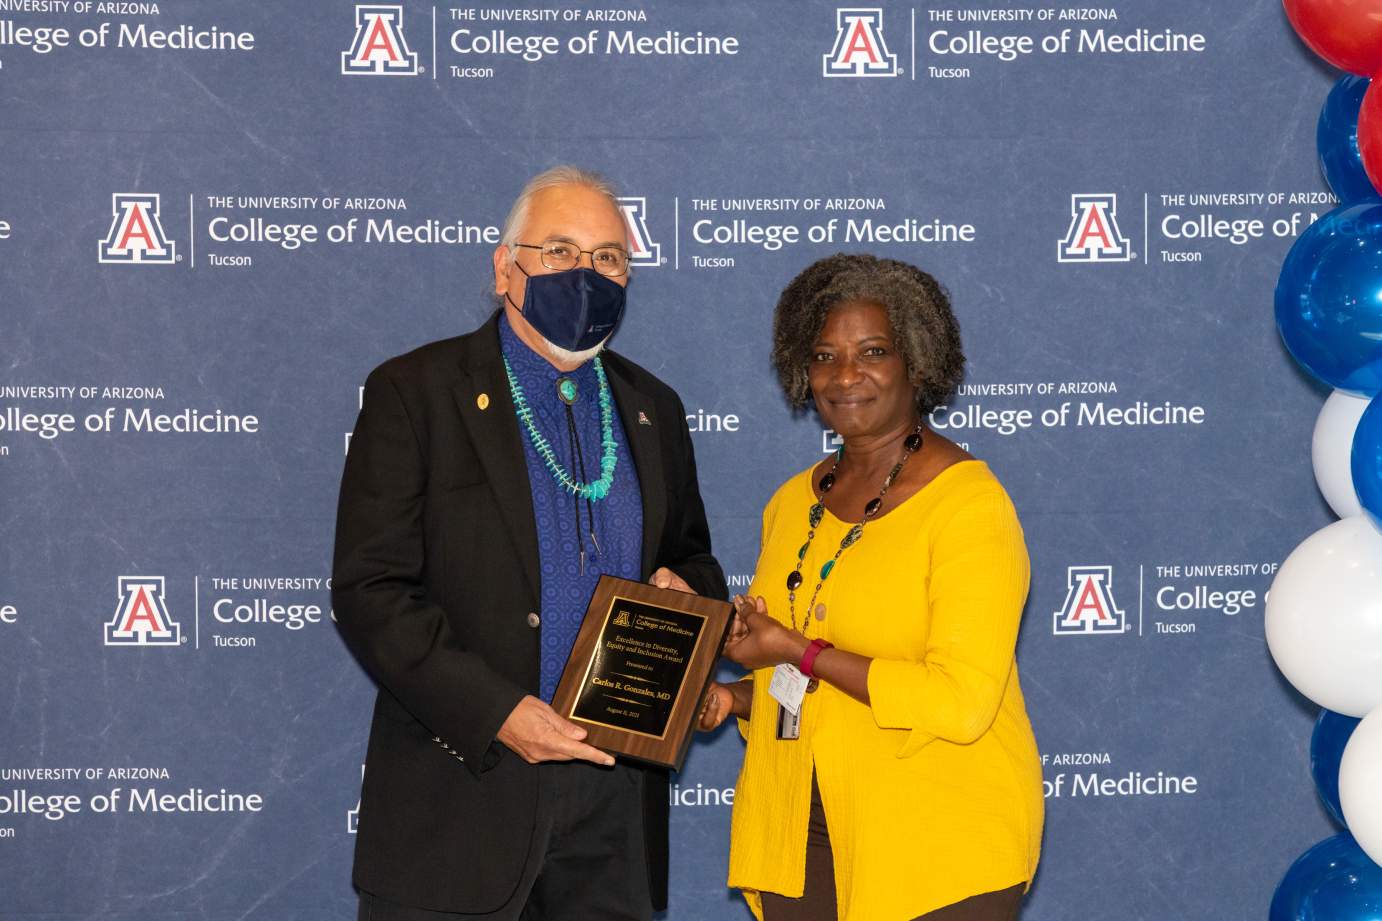 [Dr. Carlos Gonzales is presented with the Awards for Excellence in Diversity, Equity, and Inclusion by Dr. Victoria Murrain]